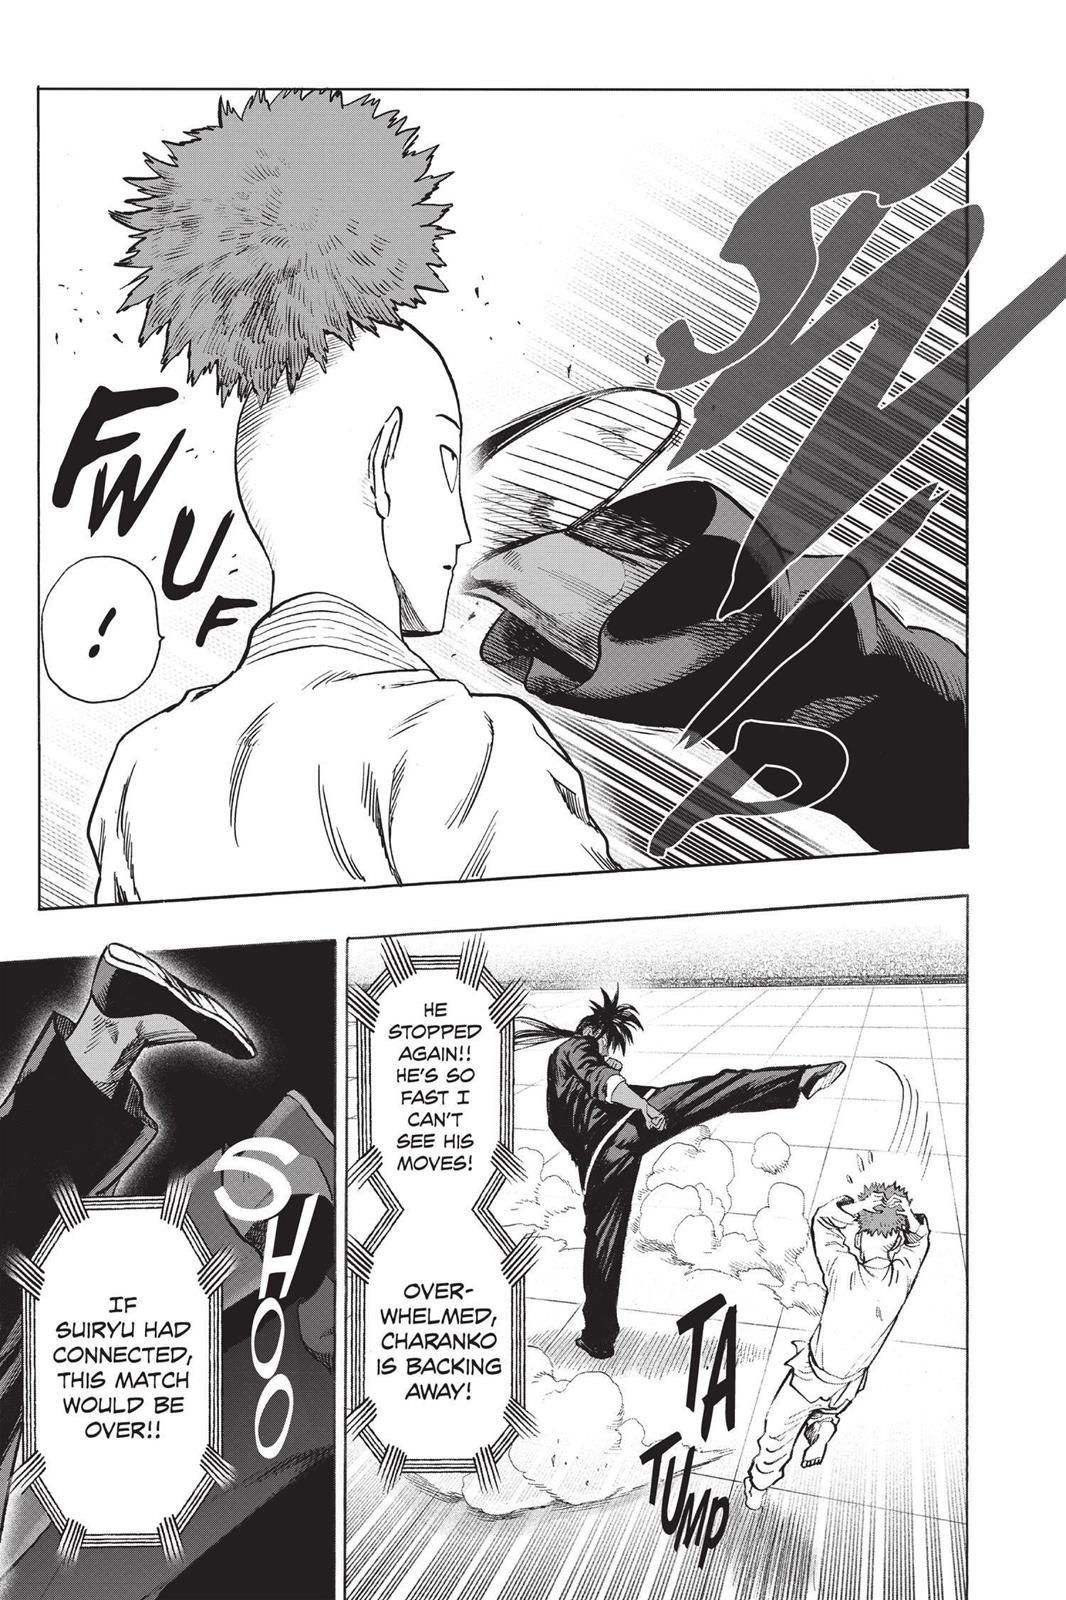 One-Punch Man, Punch 70 image 11